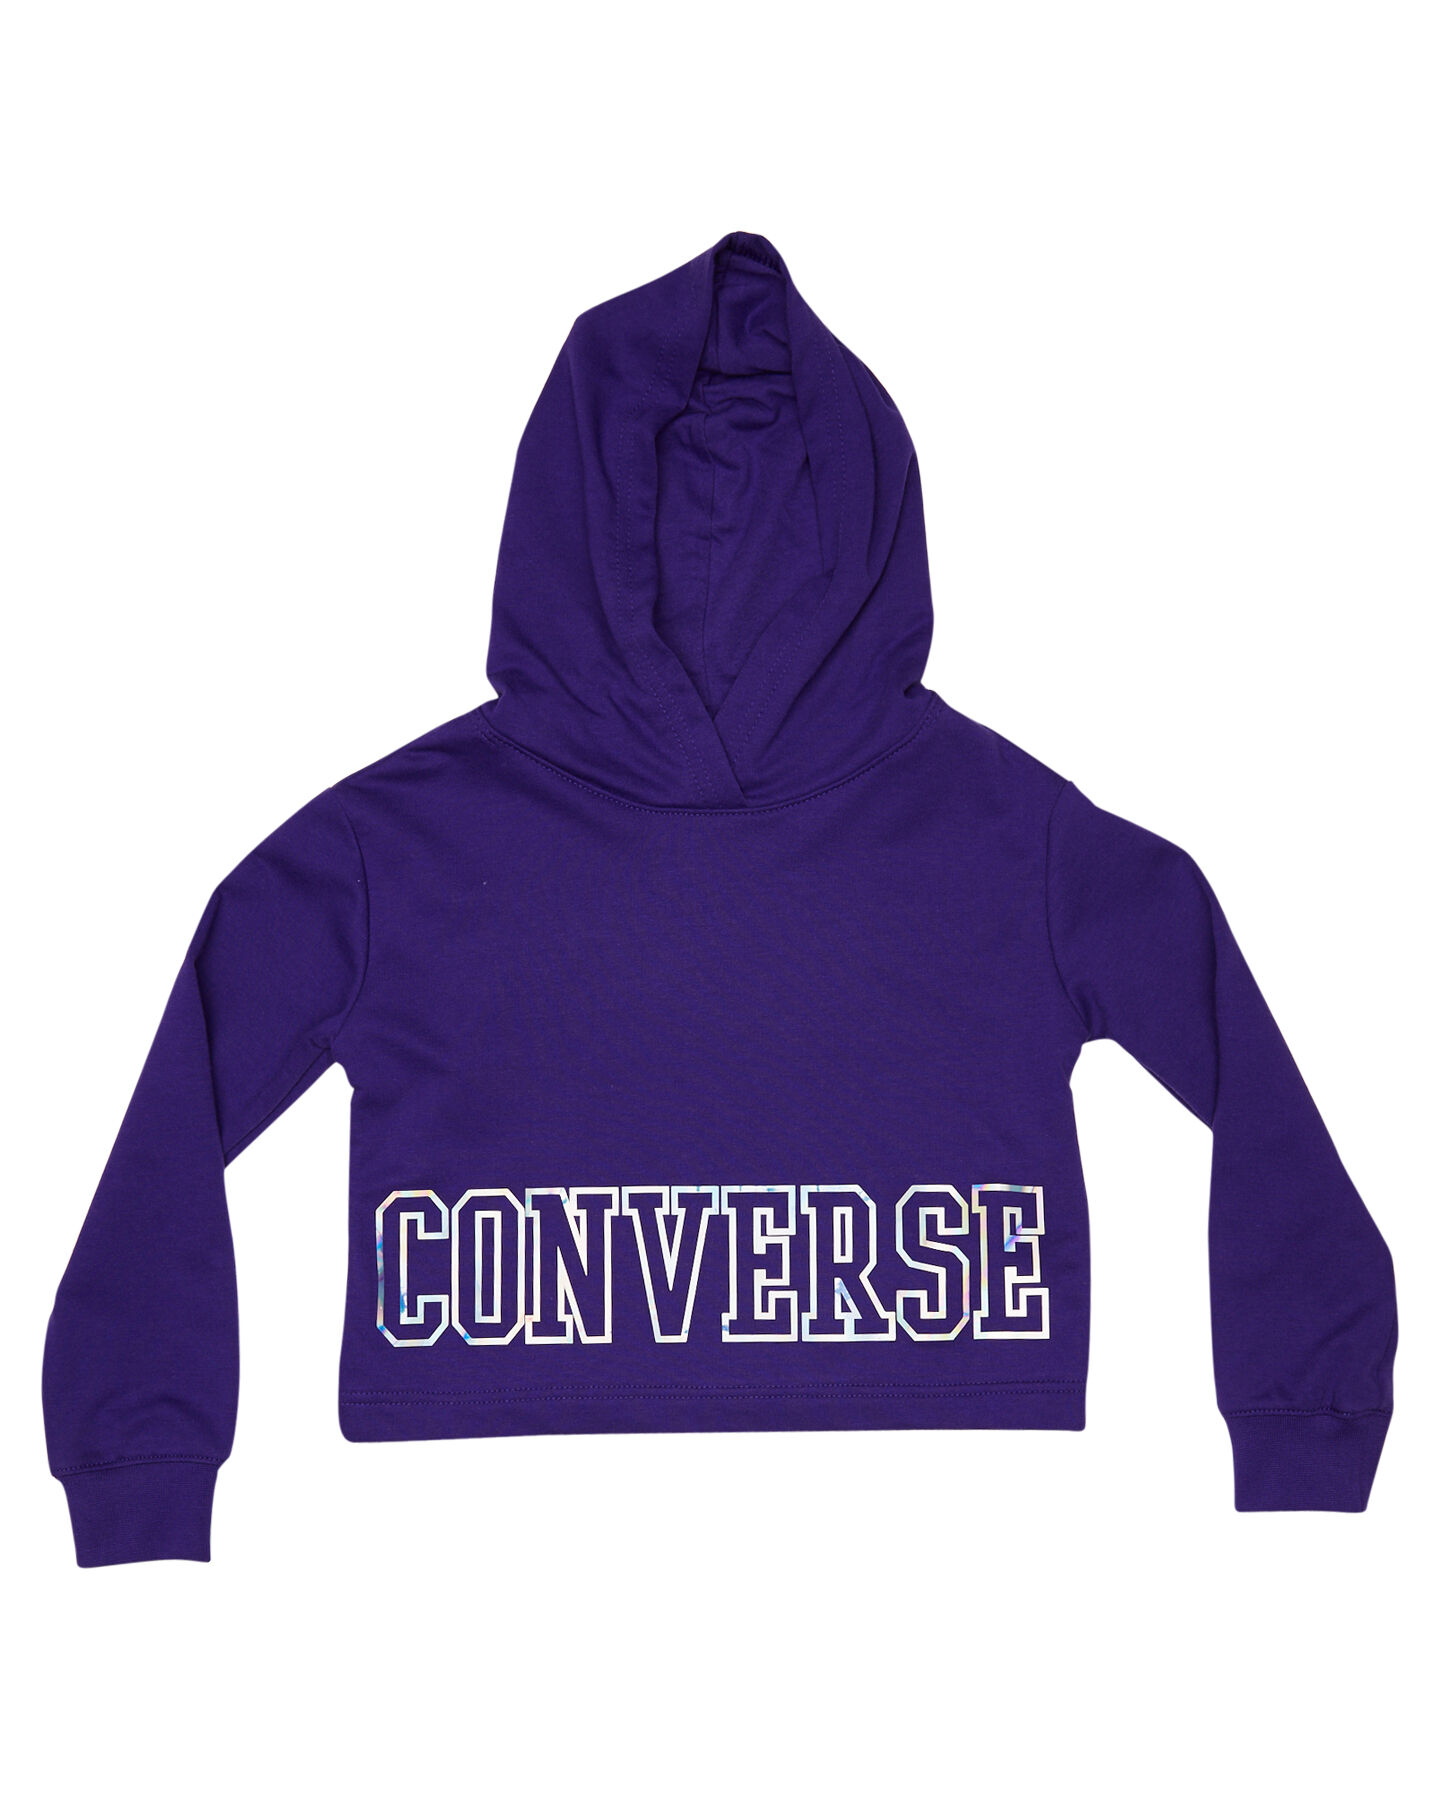 converse jumpers